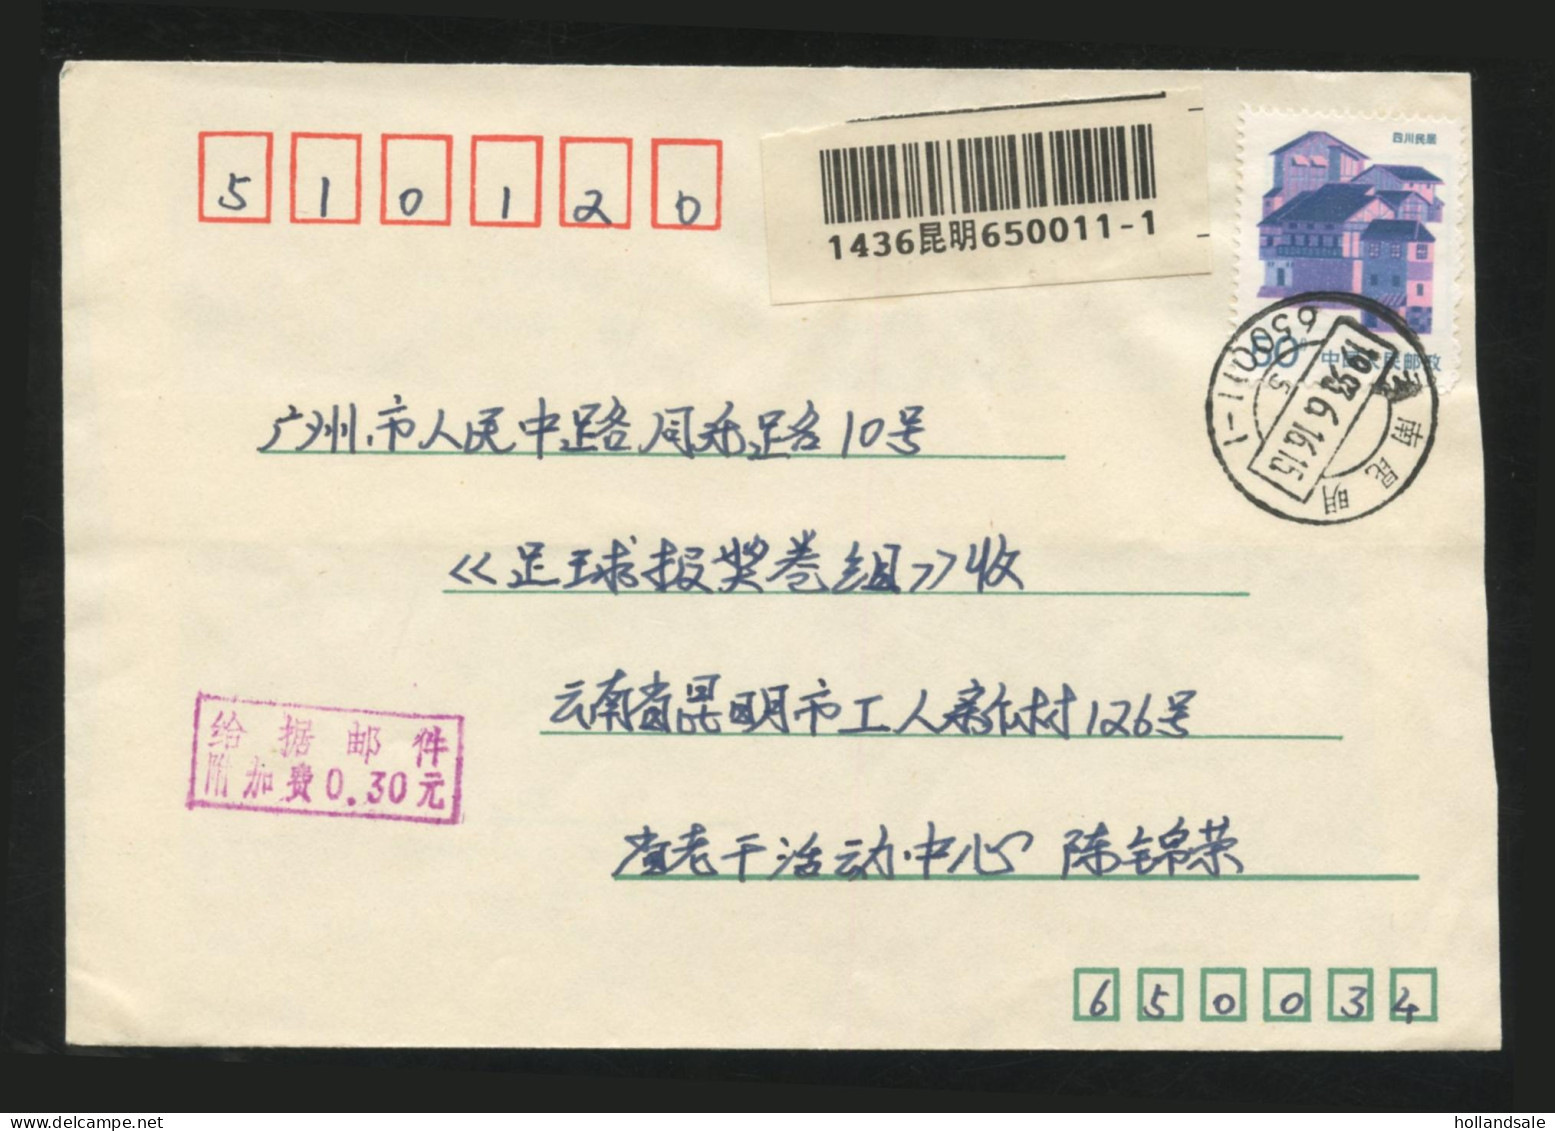 CHINA PRC / ADDED CHARGE - Cover Sent From Kunming To Guangzhou. Violet 30f AC Chop. - Timbres-taxe